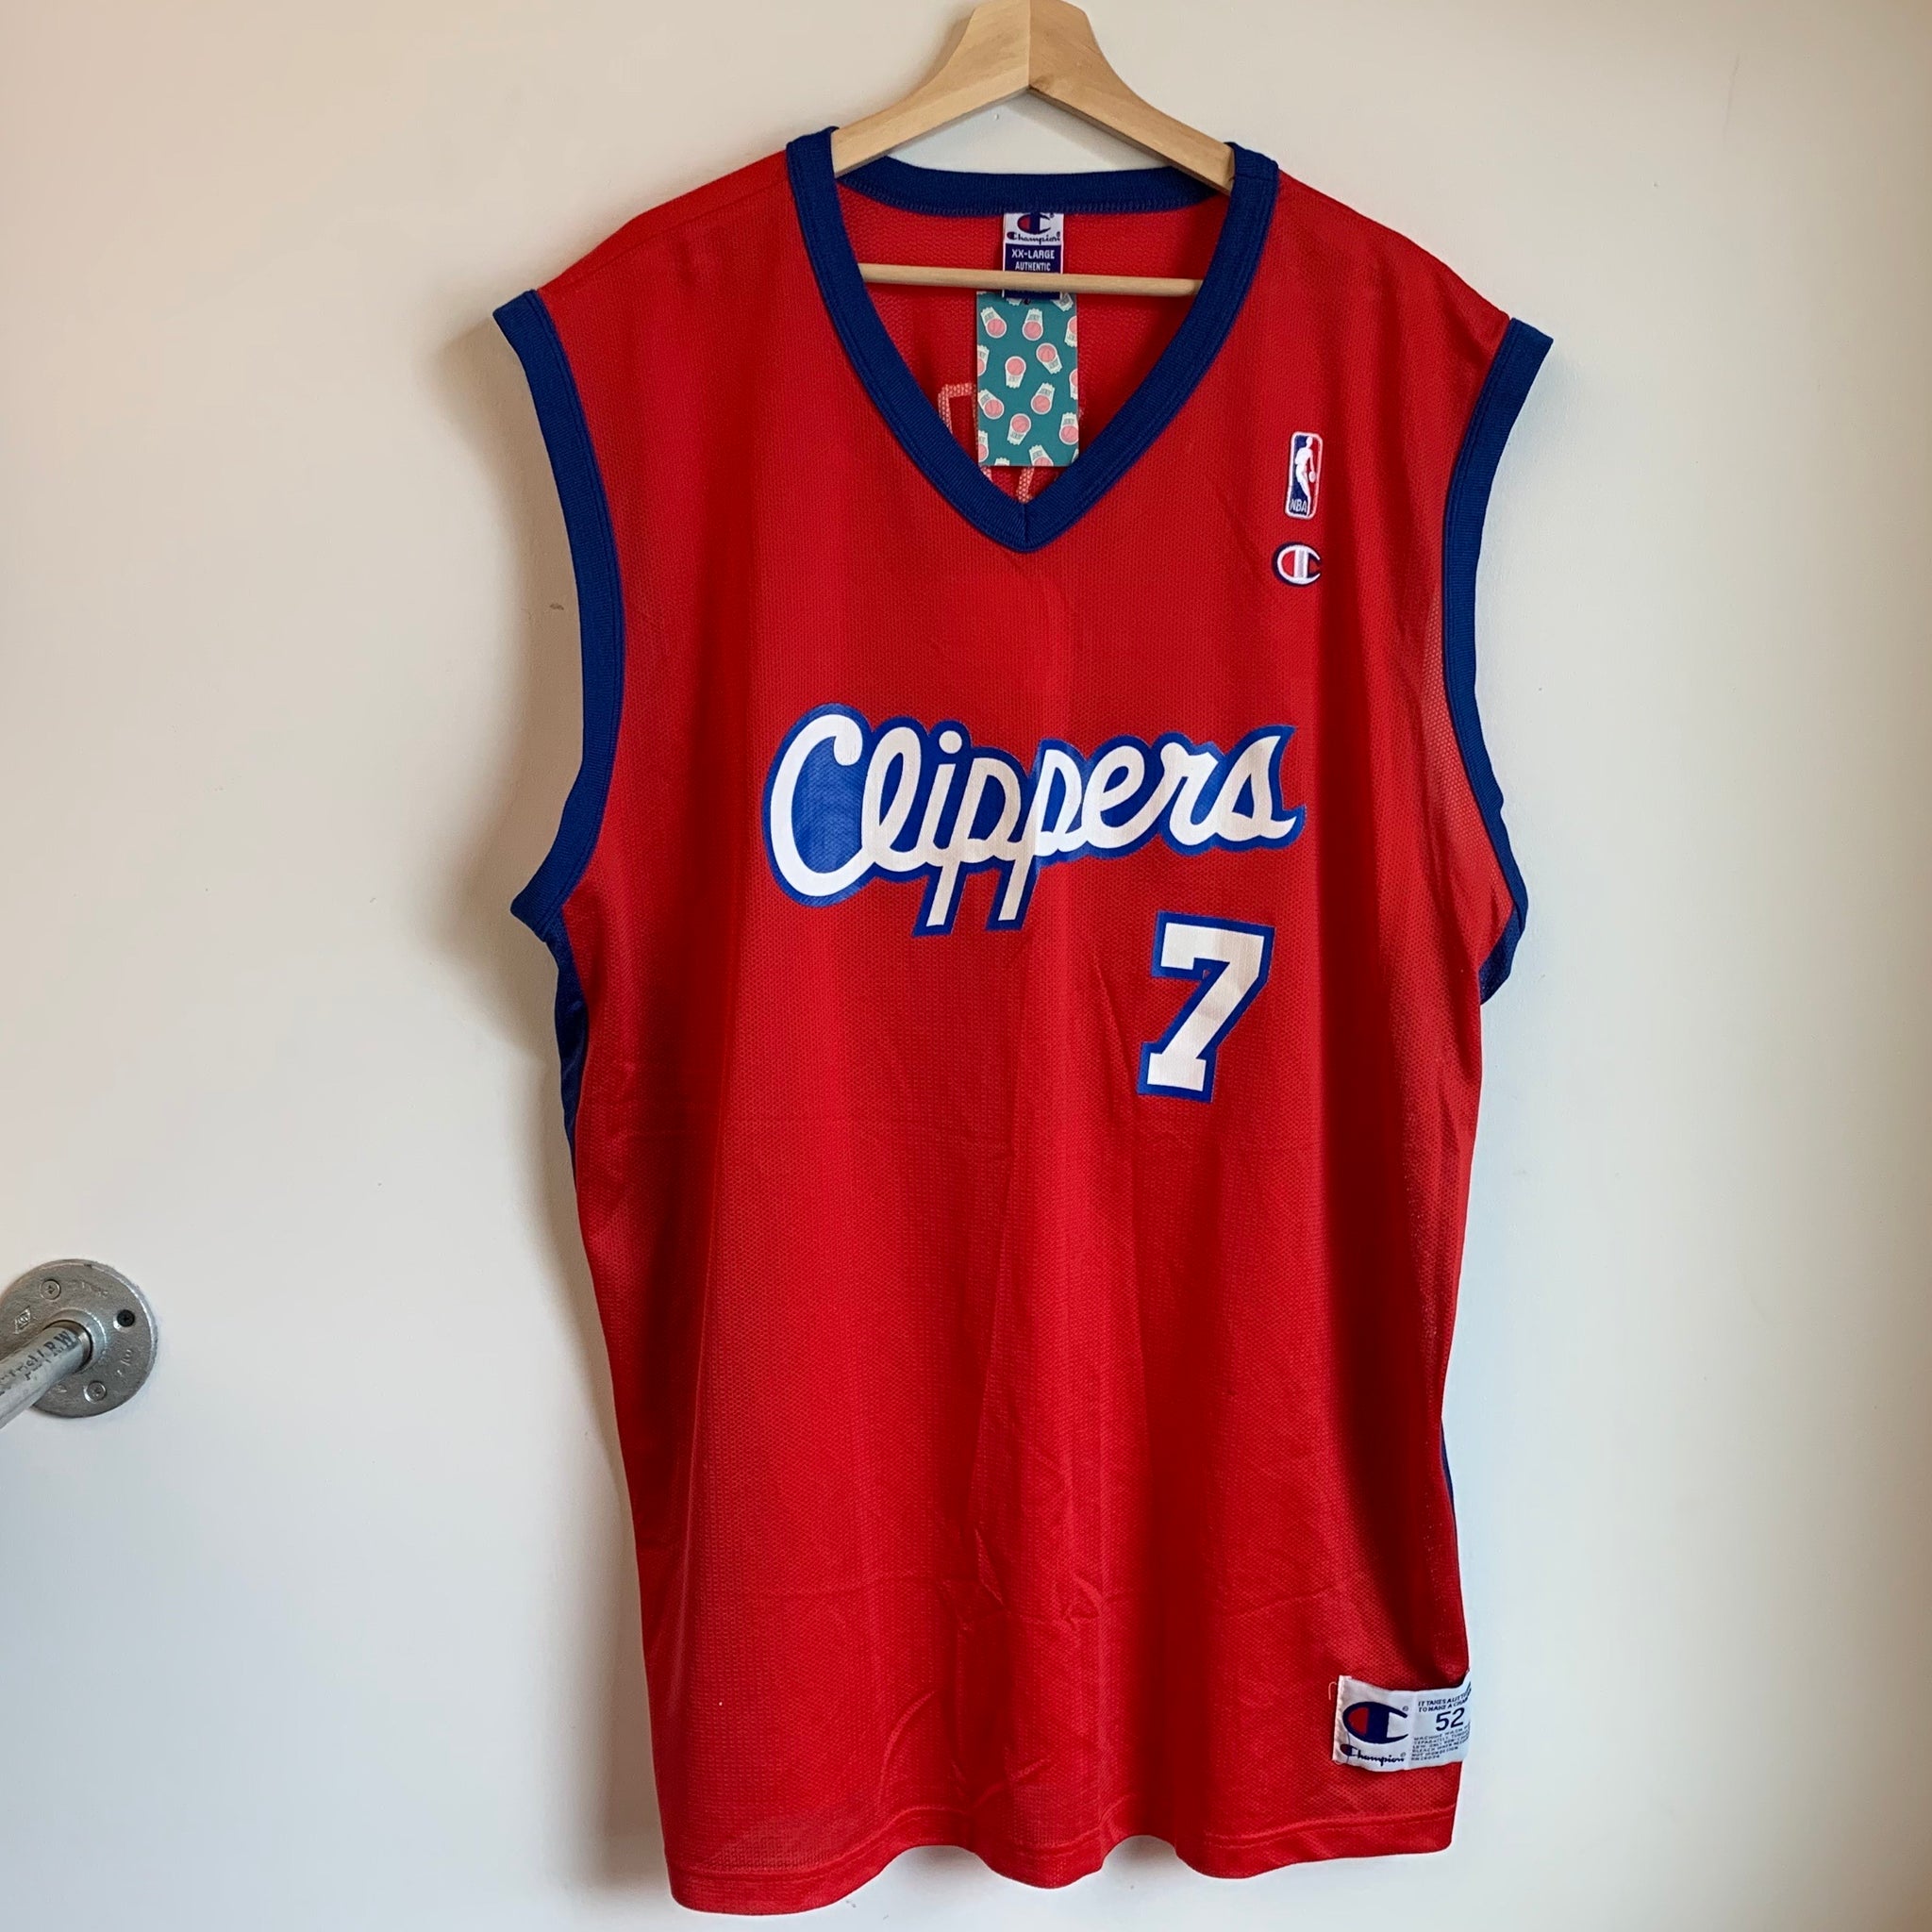 clippers jersey red